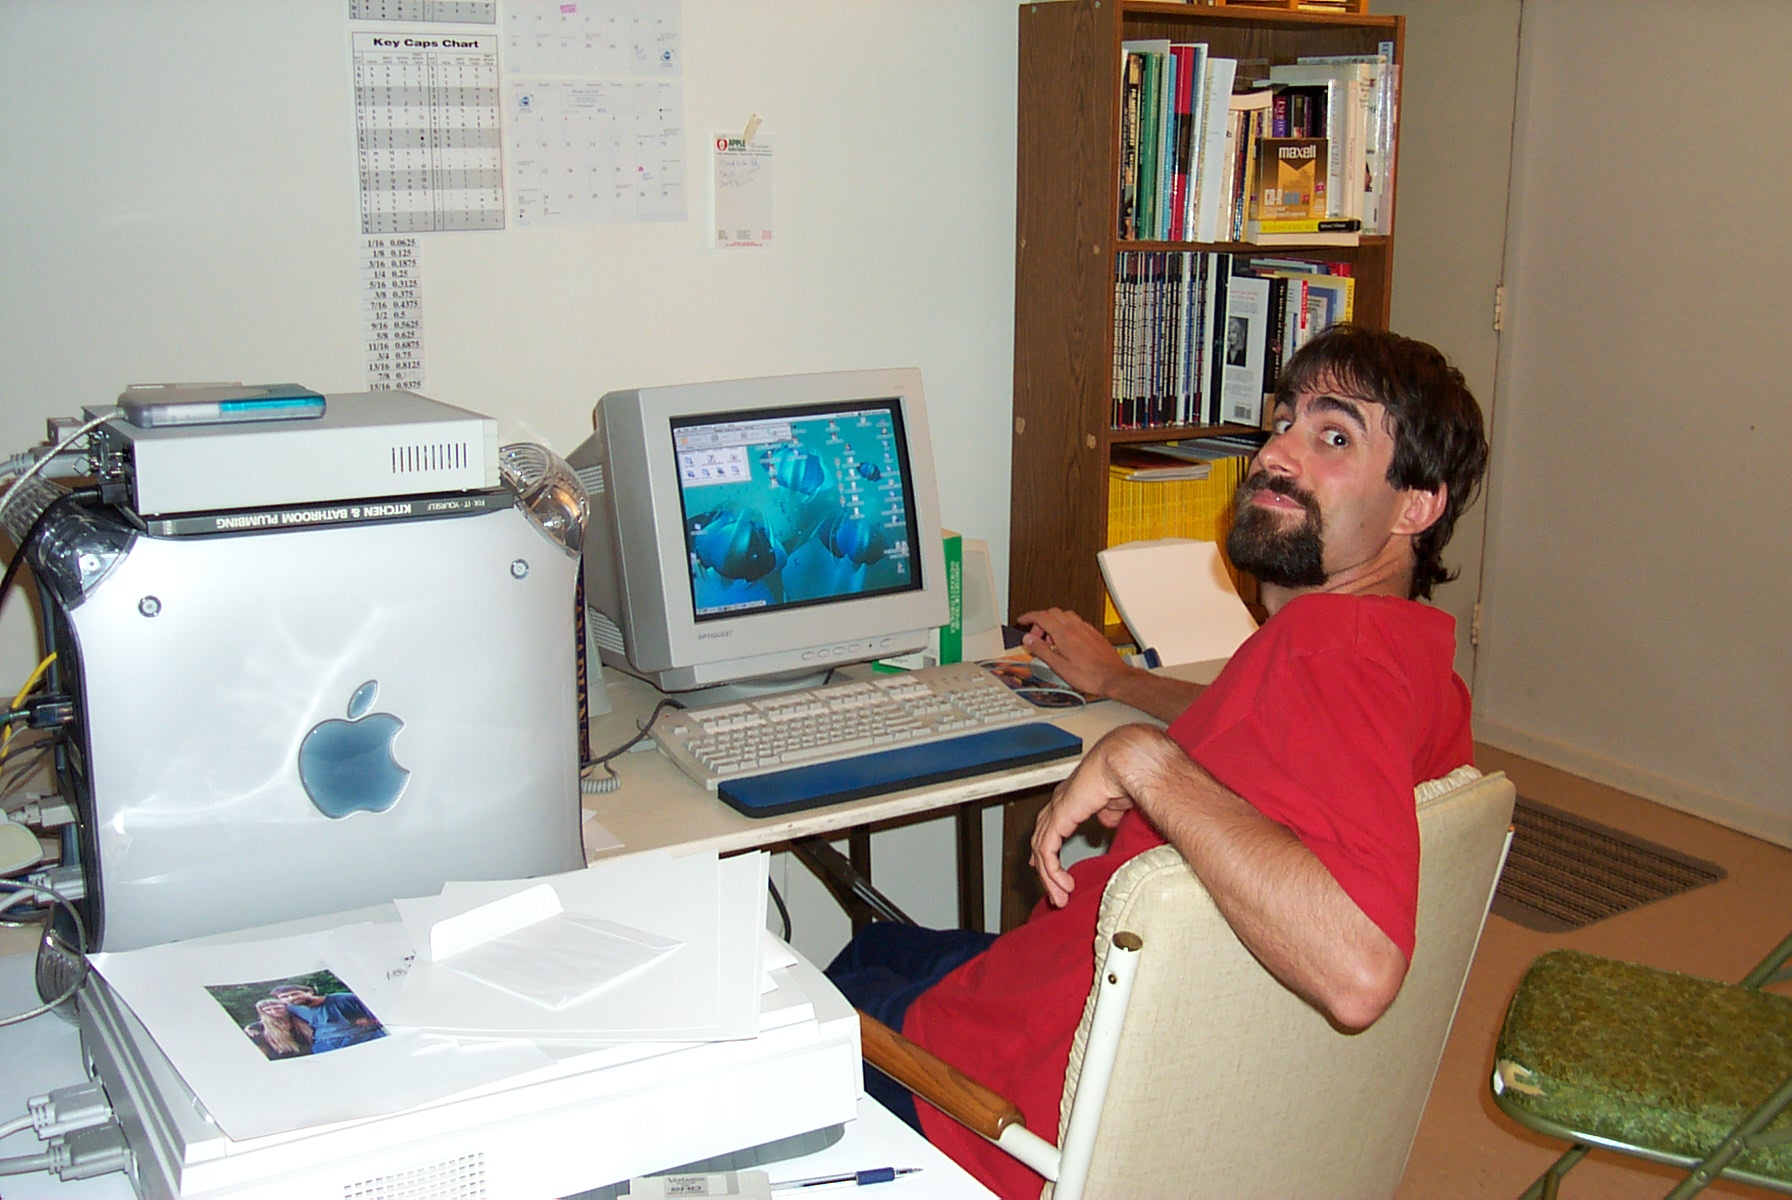 Me in front of my old PowerMac G4